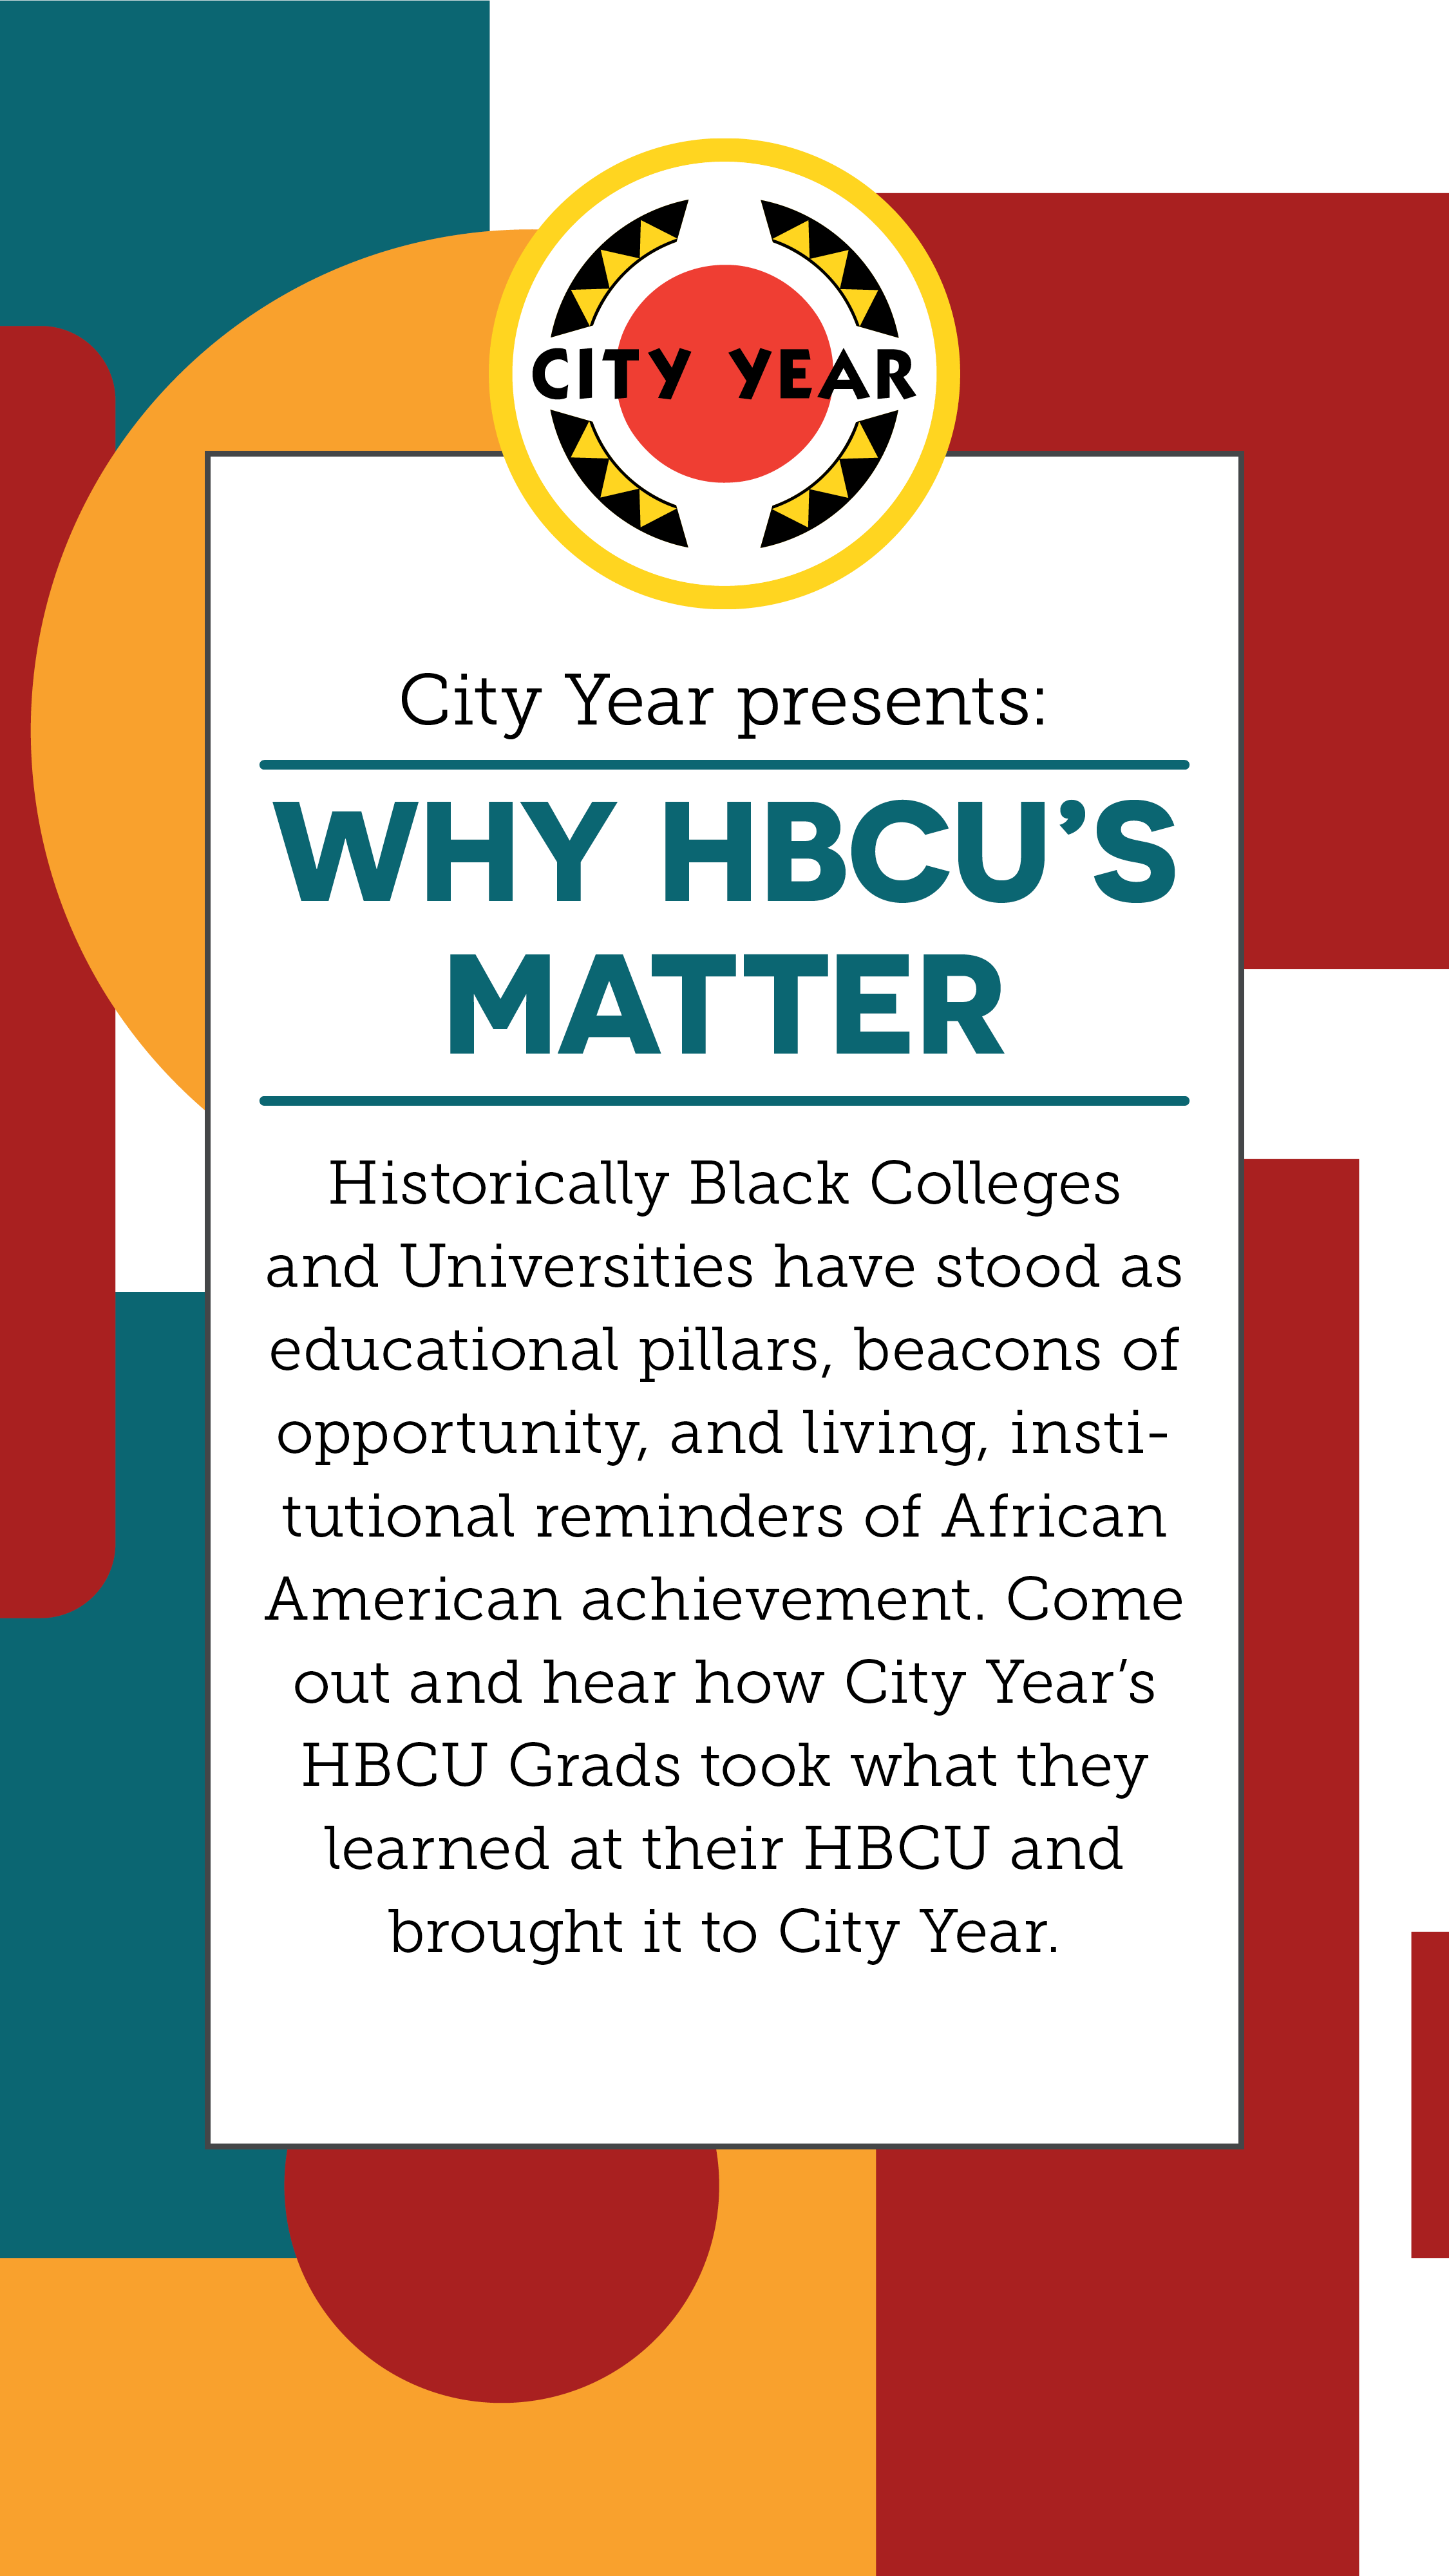 Why HBCUs matter event graphic with City Year logo and teal, tangerine, and garnet shapes in the background